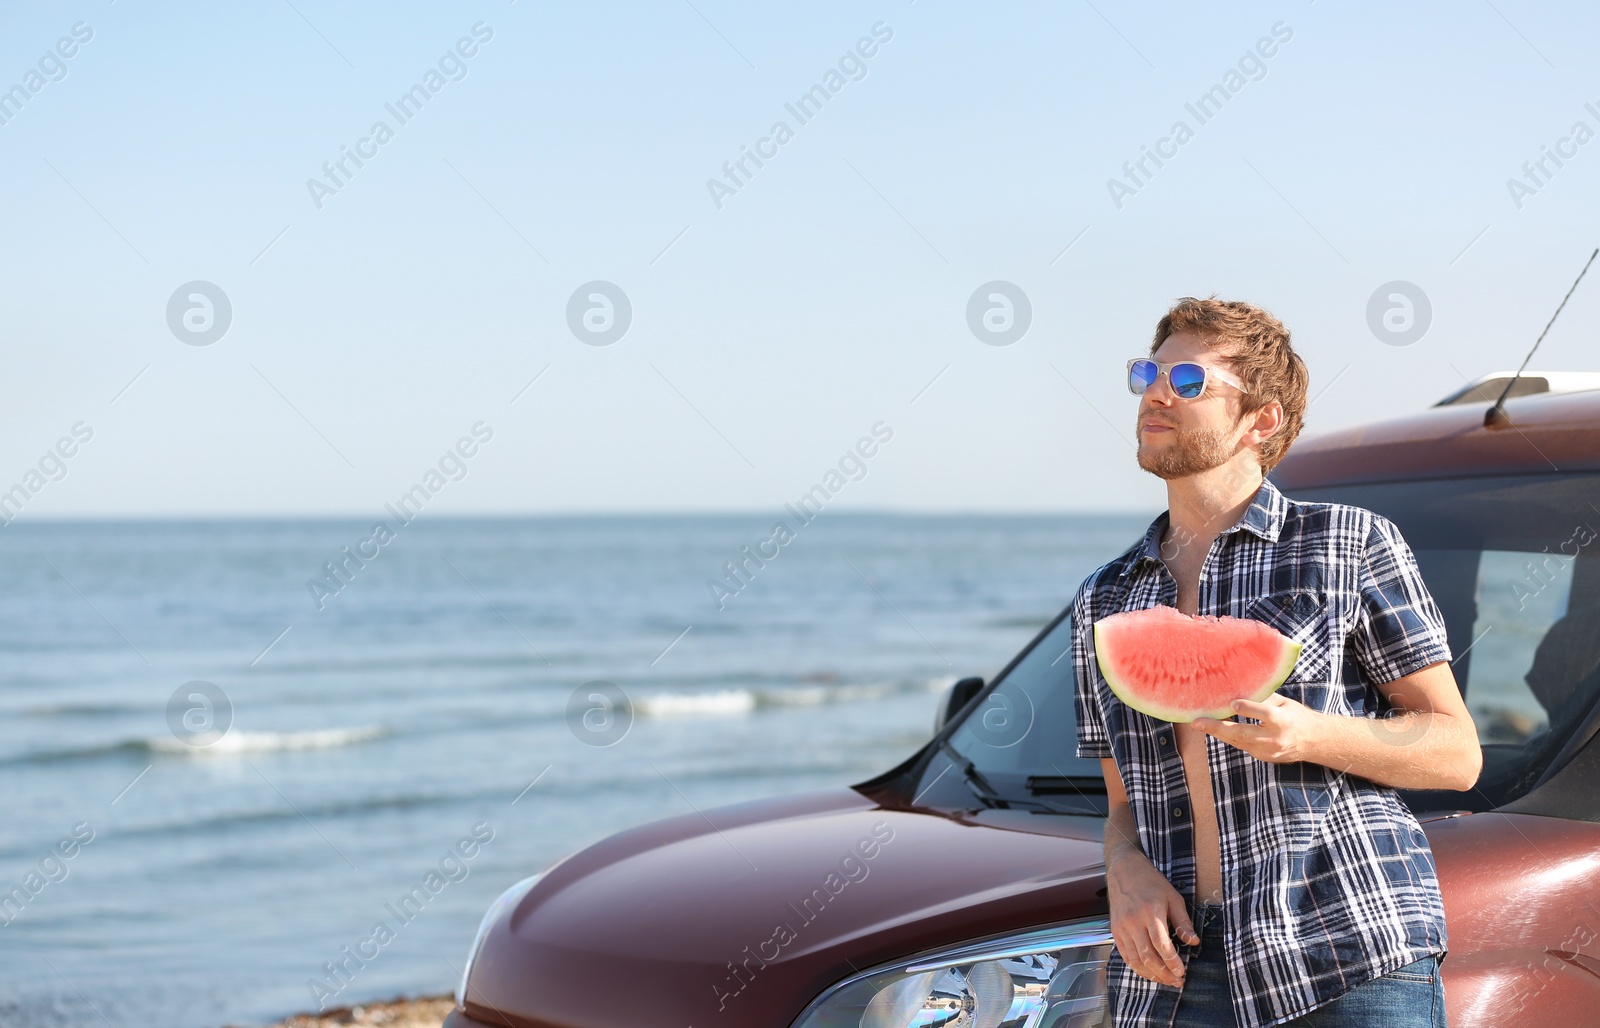 Photo of Young man with watermelon slice near car on beach. Space for text